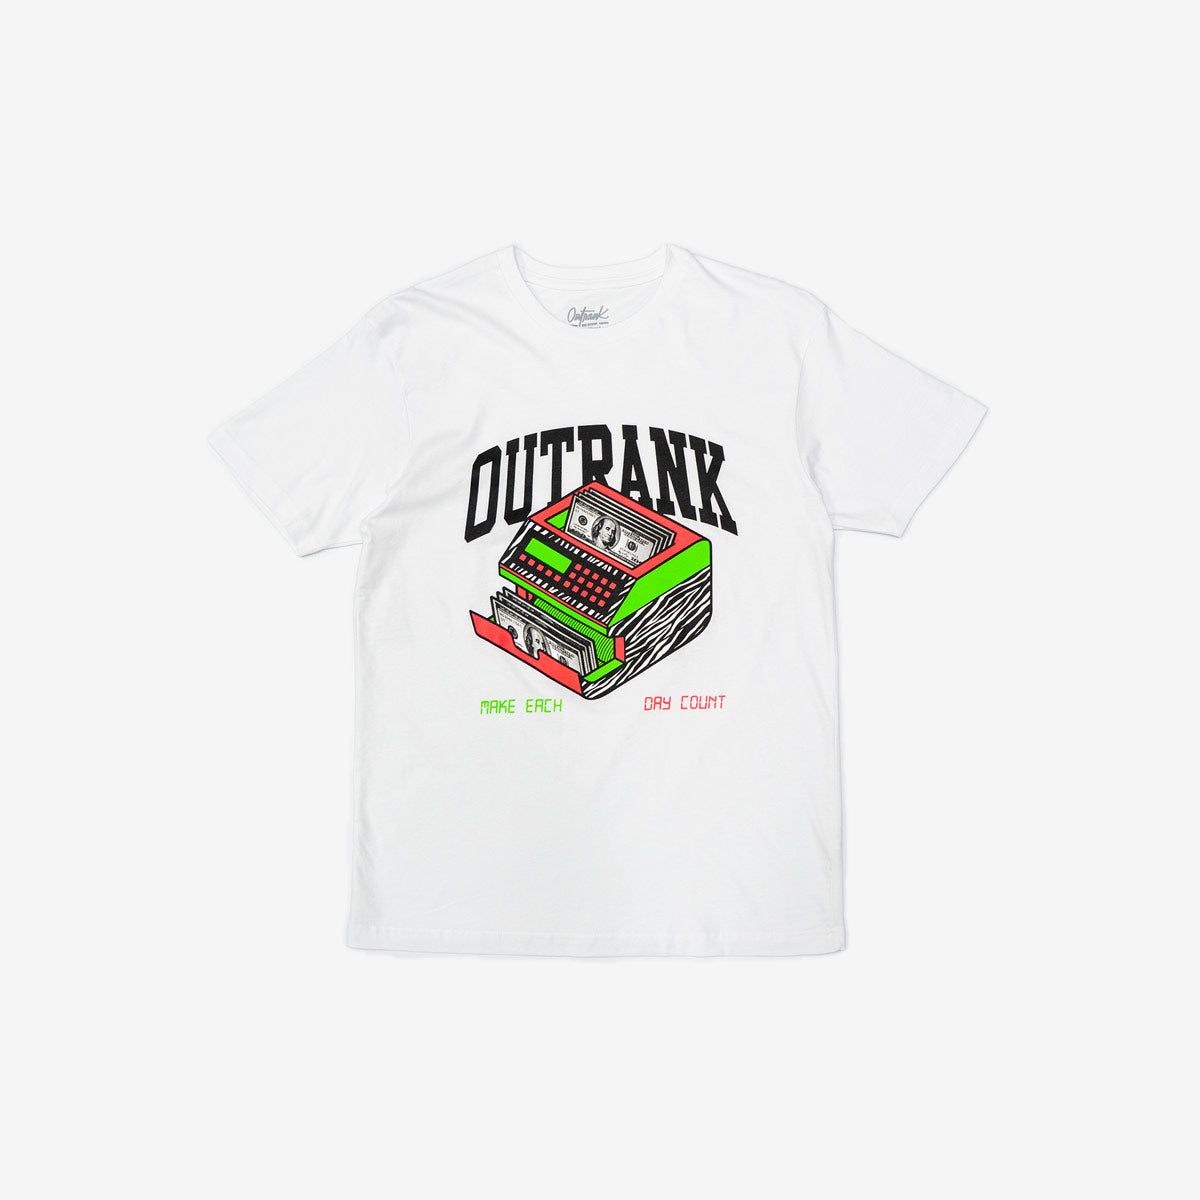 Outrank Make Each Day Count Tee